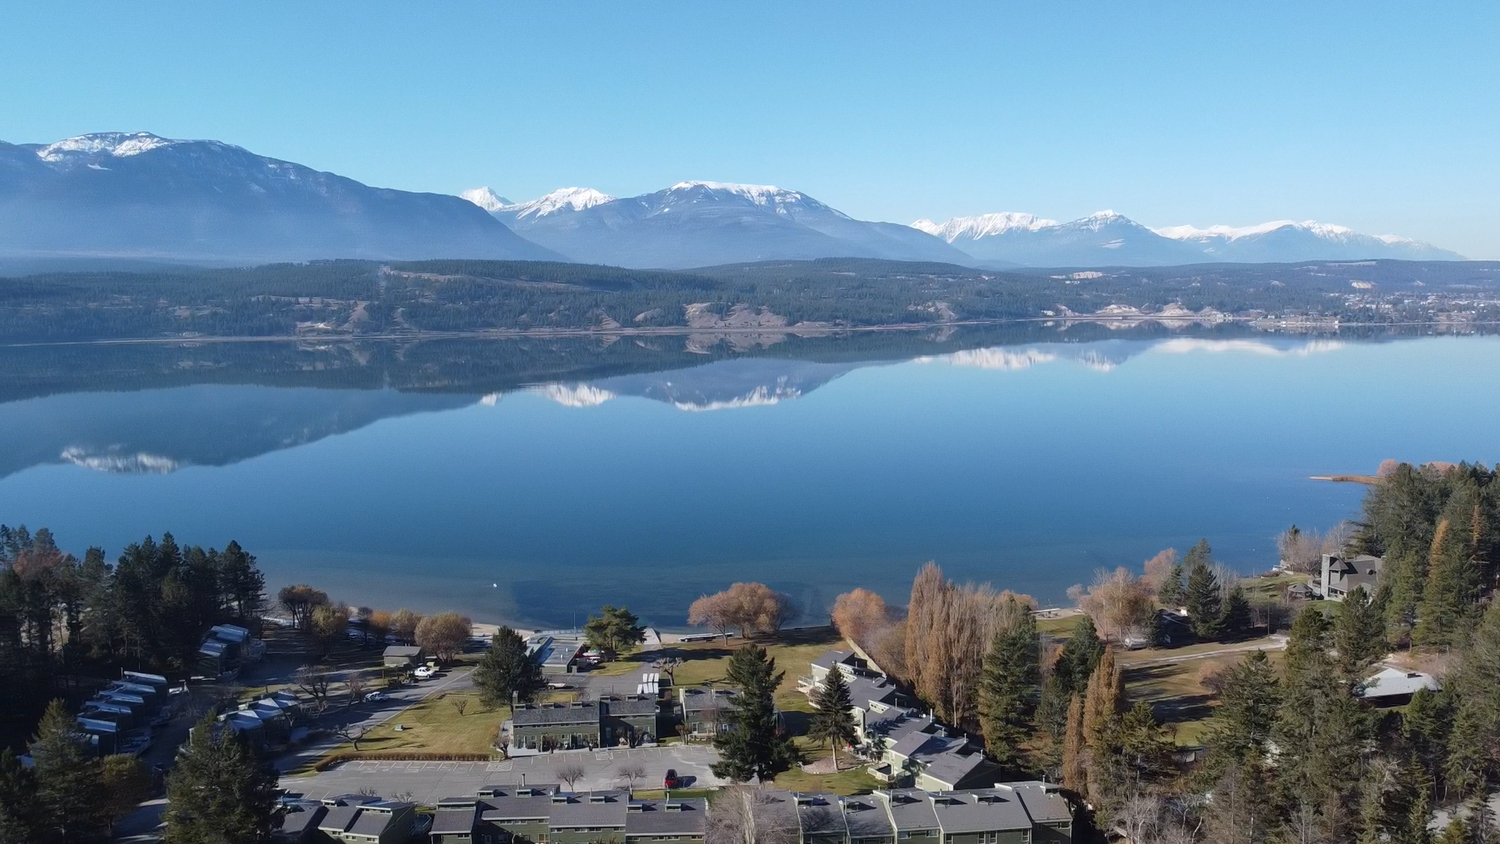 Aerial view of Lake Windermere's serene lakefront, showcasing the mirror-like reflection of surrounding mountains on the calm water, with lush trees and a community of houses along the shoreline.